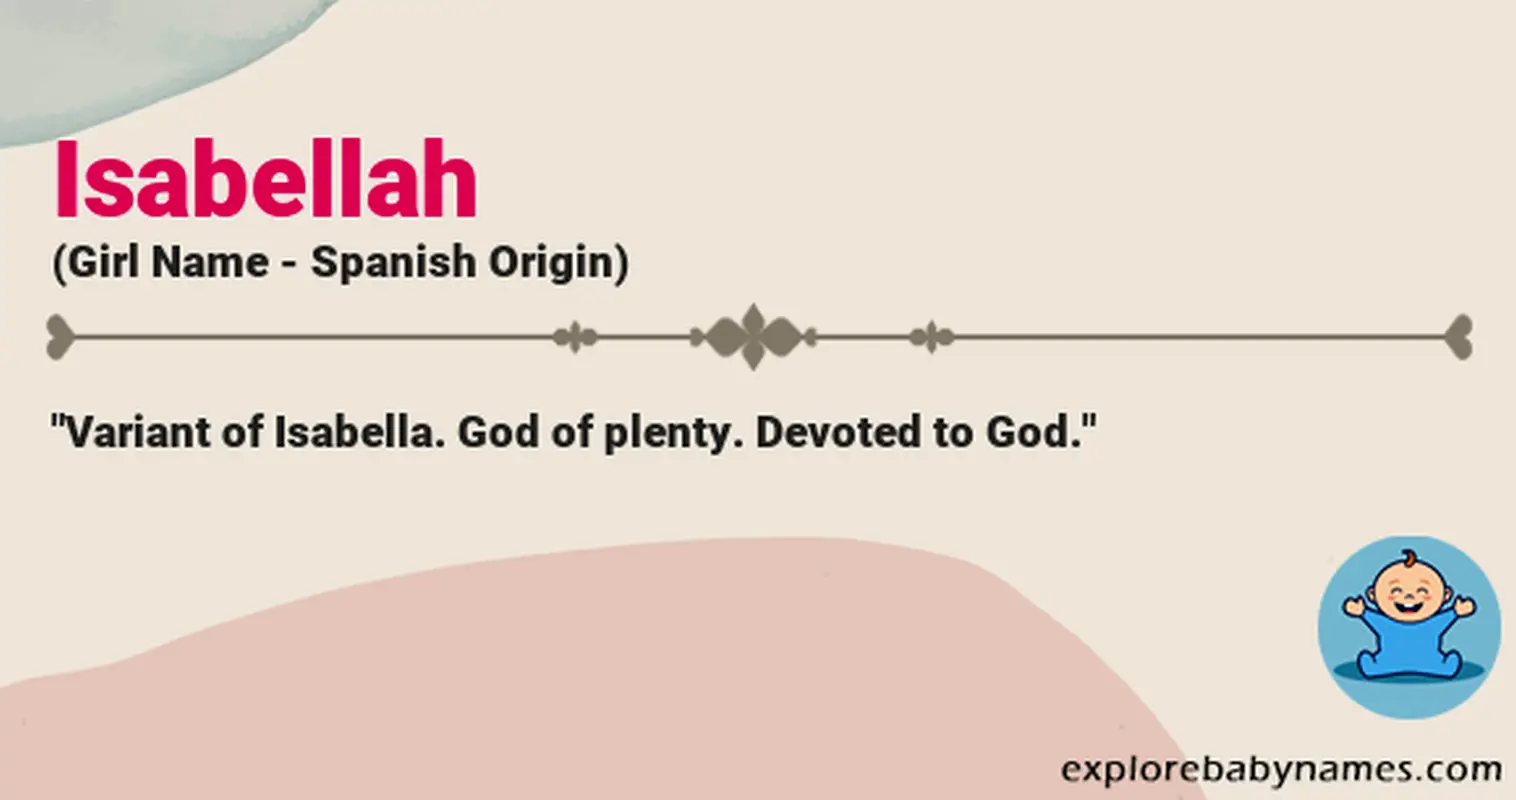 Meaning of Isabellah